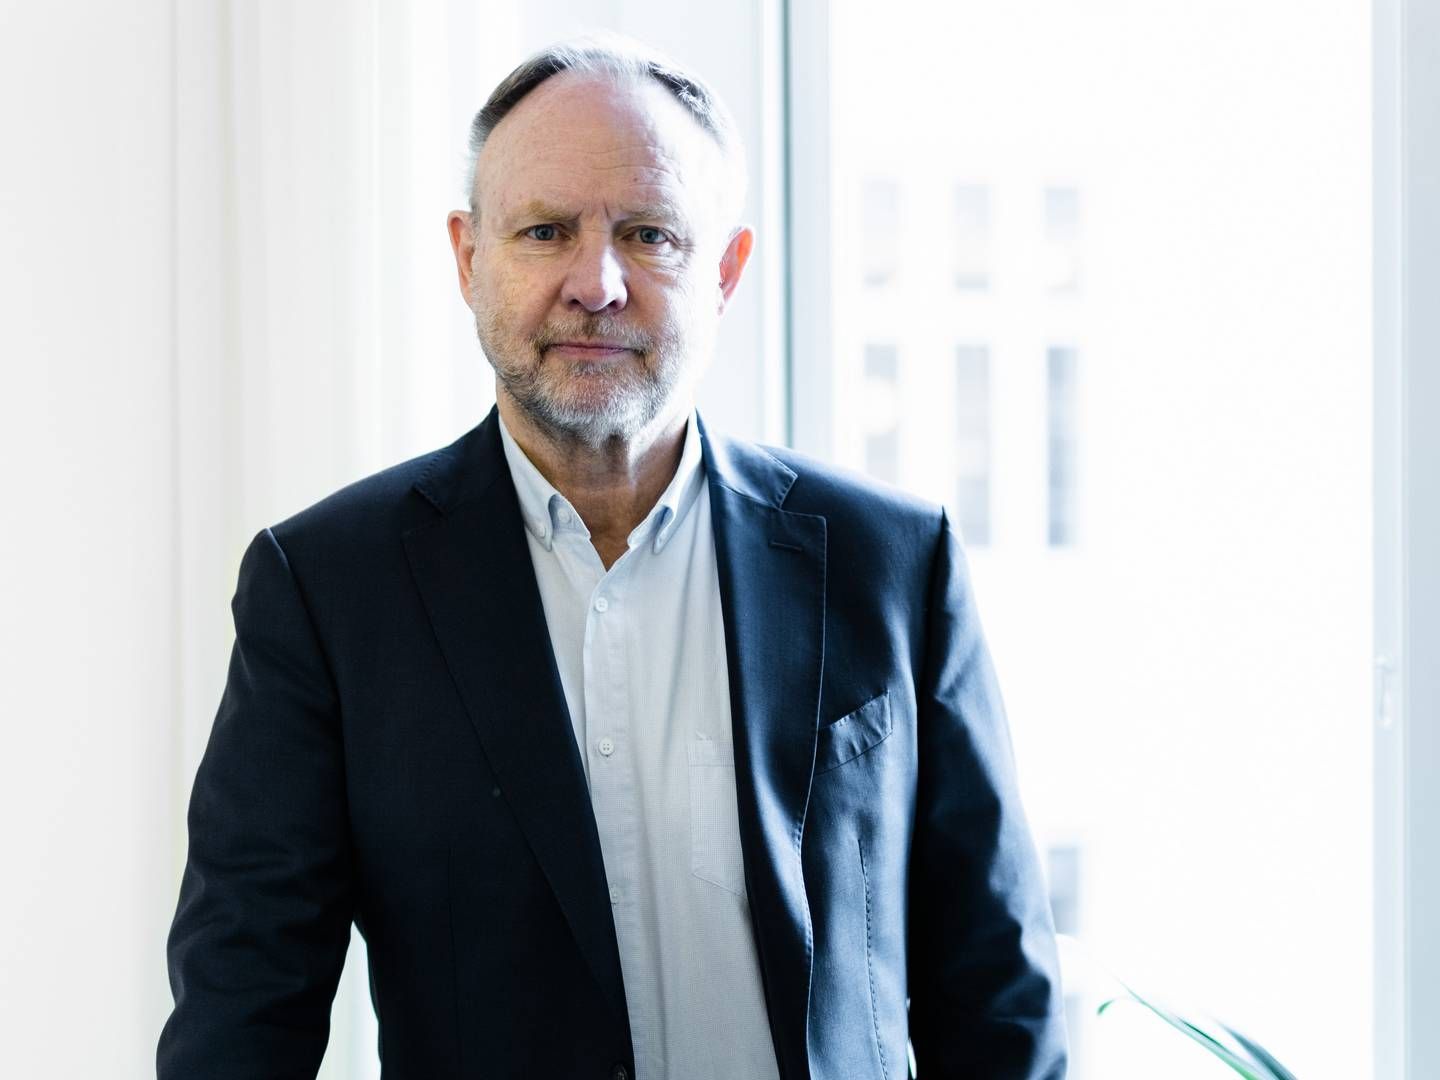 The former owner of consultancy firm Kirstein, Jesper Kirstein, is a new board member of pension platform pensions.dk. | Photo: Pr/kirstein A/s